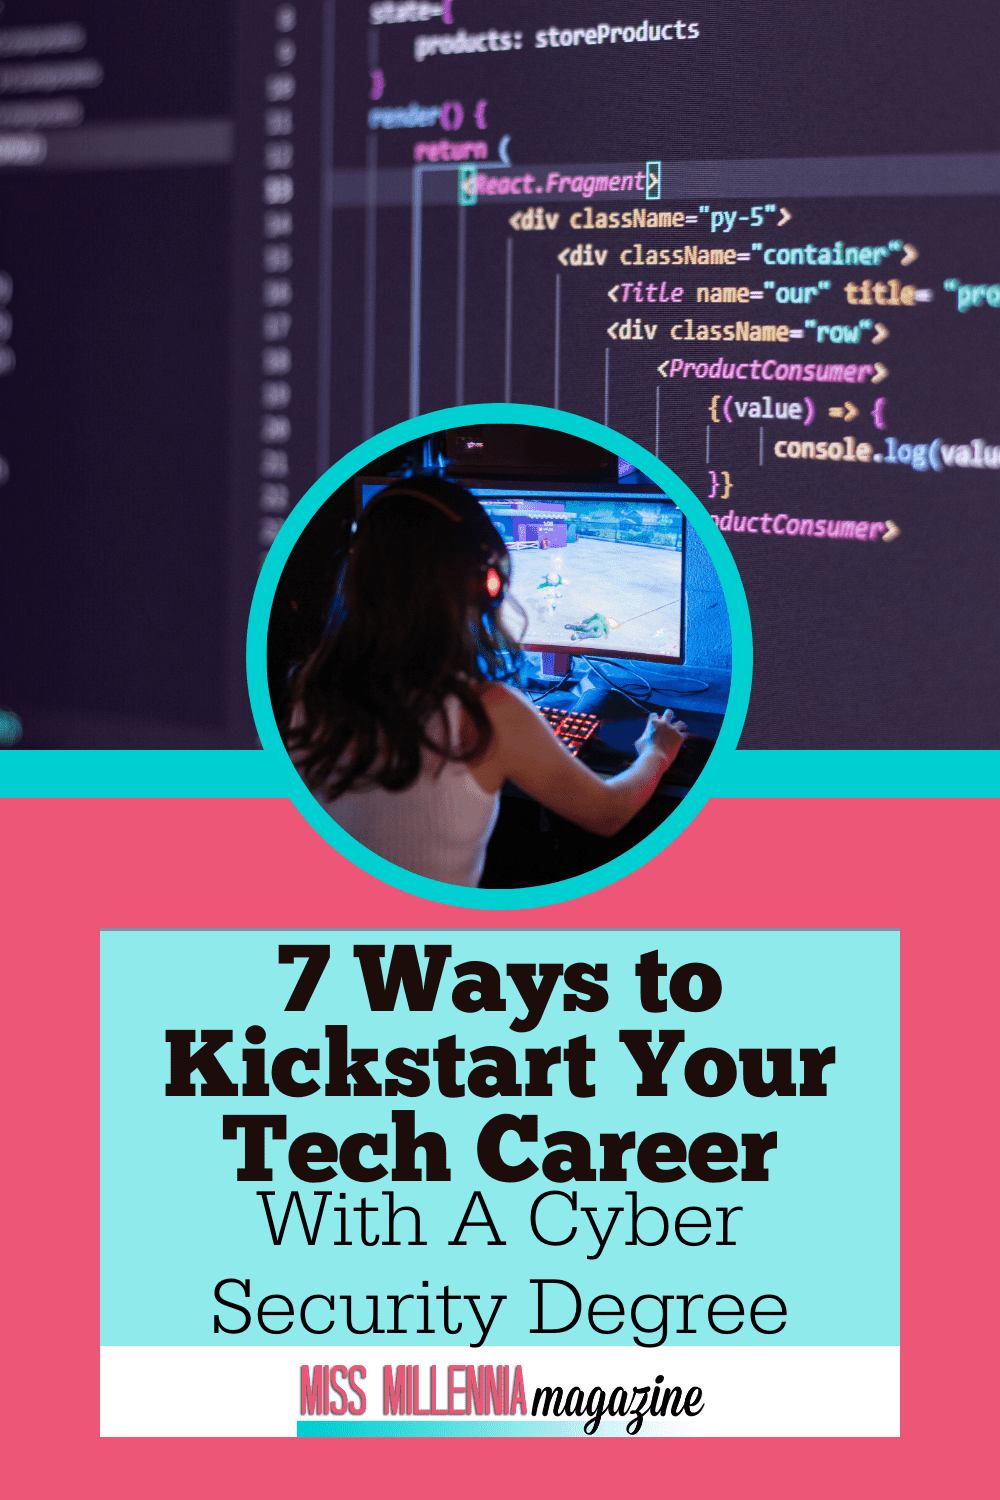 7 Ways to Kickstart Your Tech Career With A CyberSecurity Degree